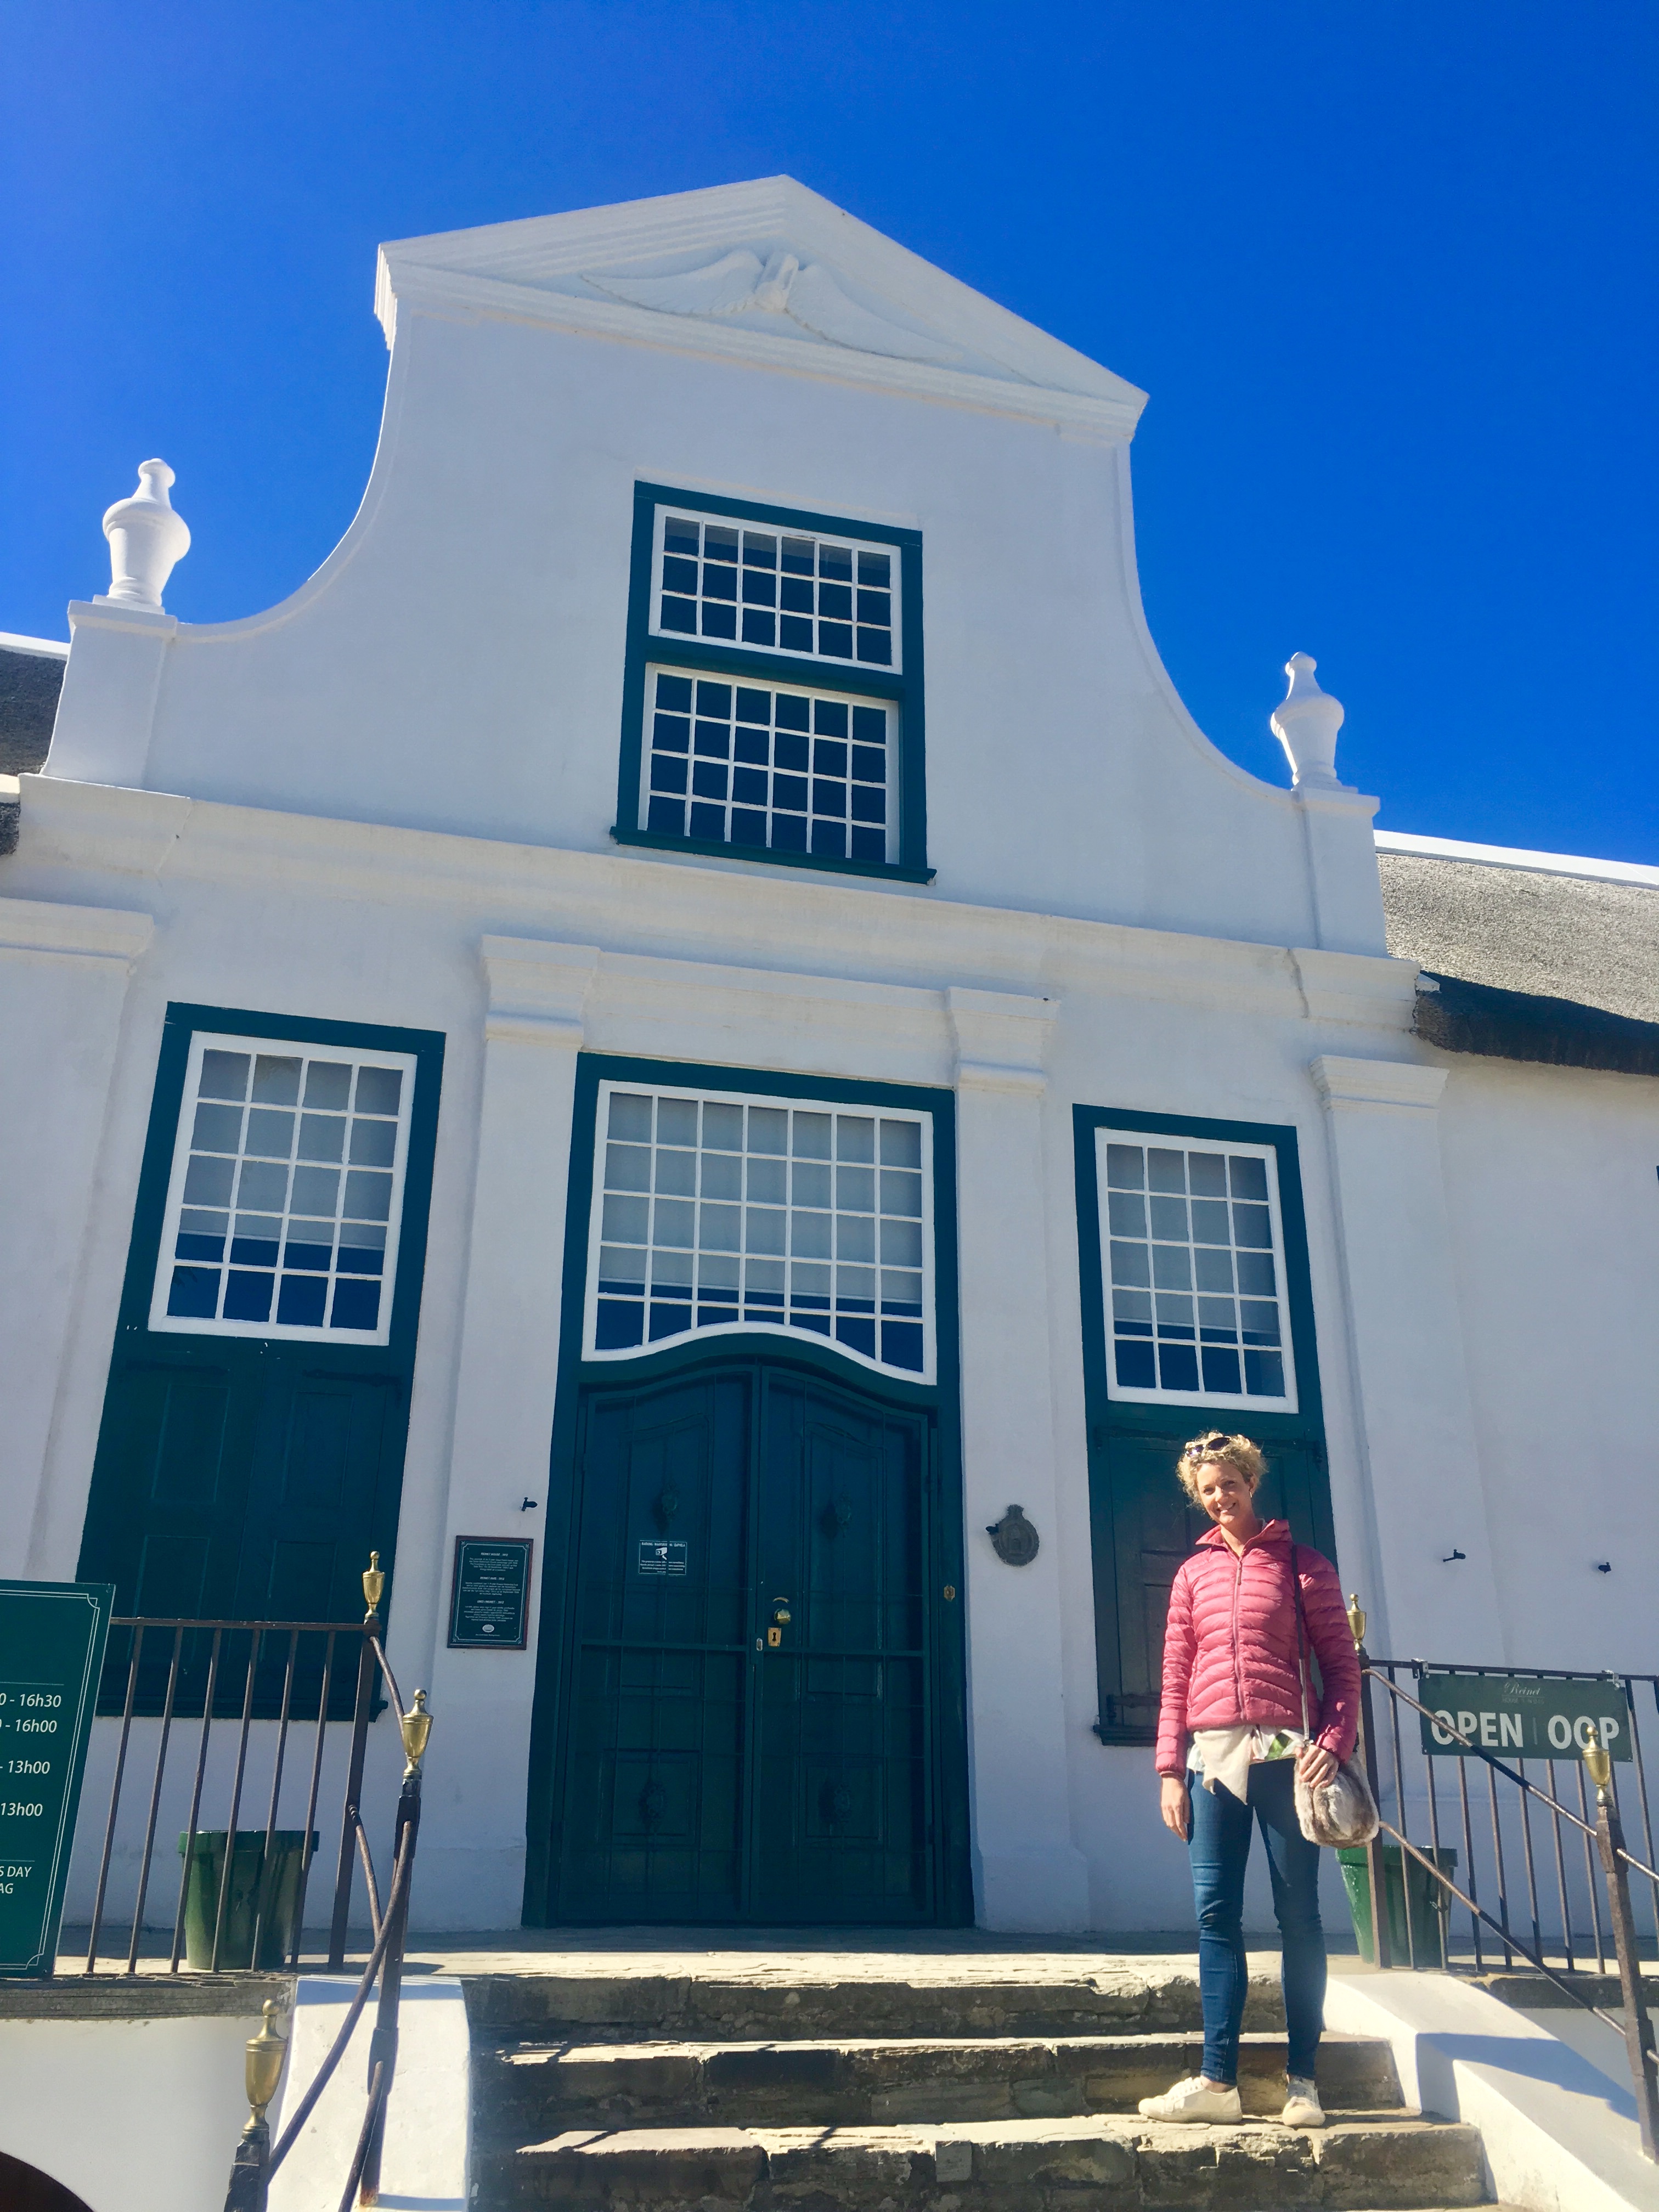 The historic Reinet House in Graaff-Reinet, once the home of legendary preacher Andrew Murrey.